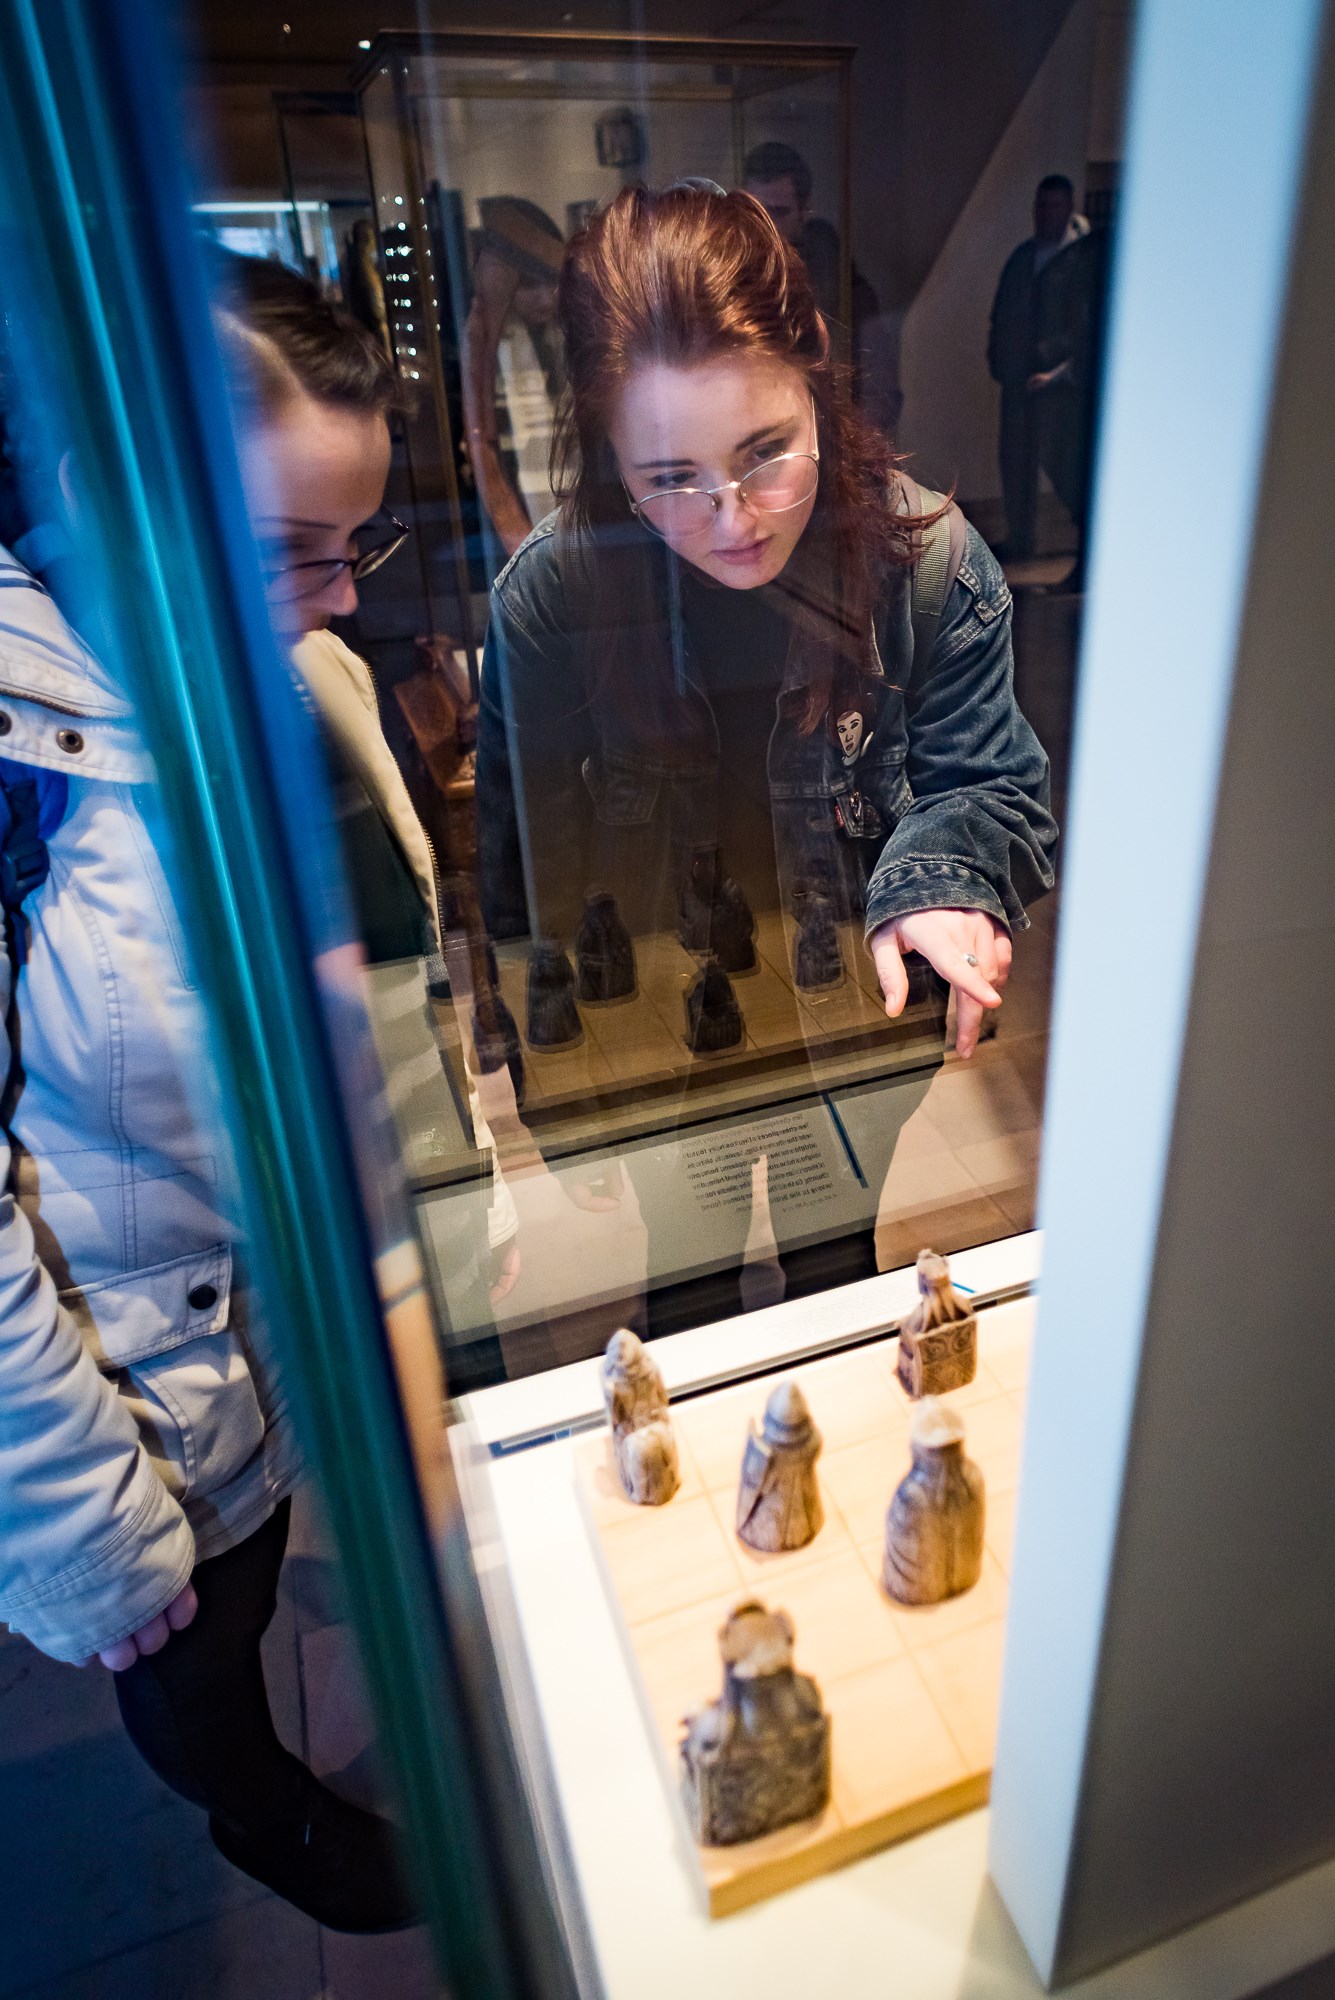 Two visitors looking at Lewis chess pieces in a glass cabinet.